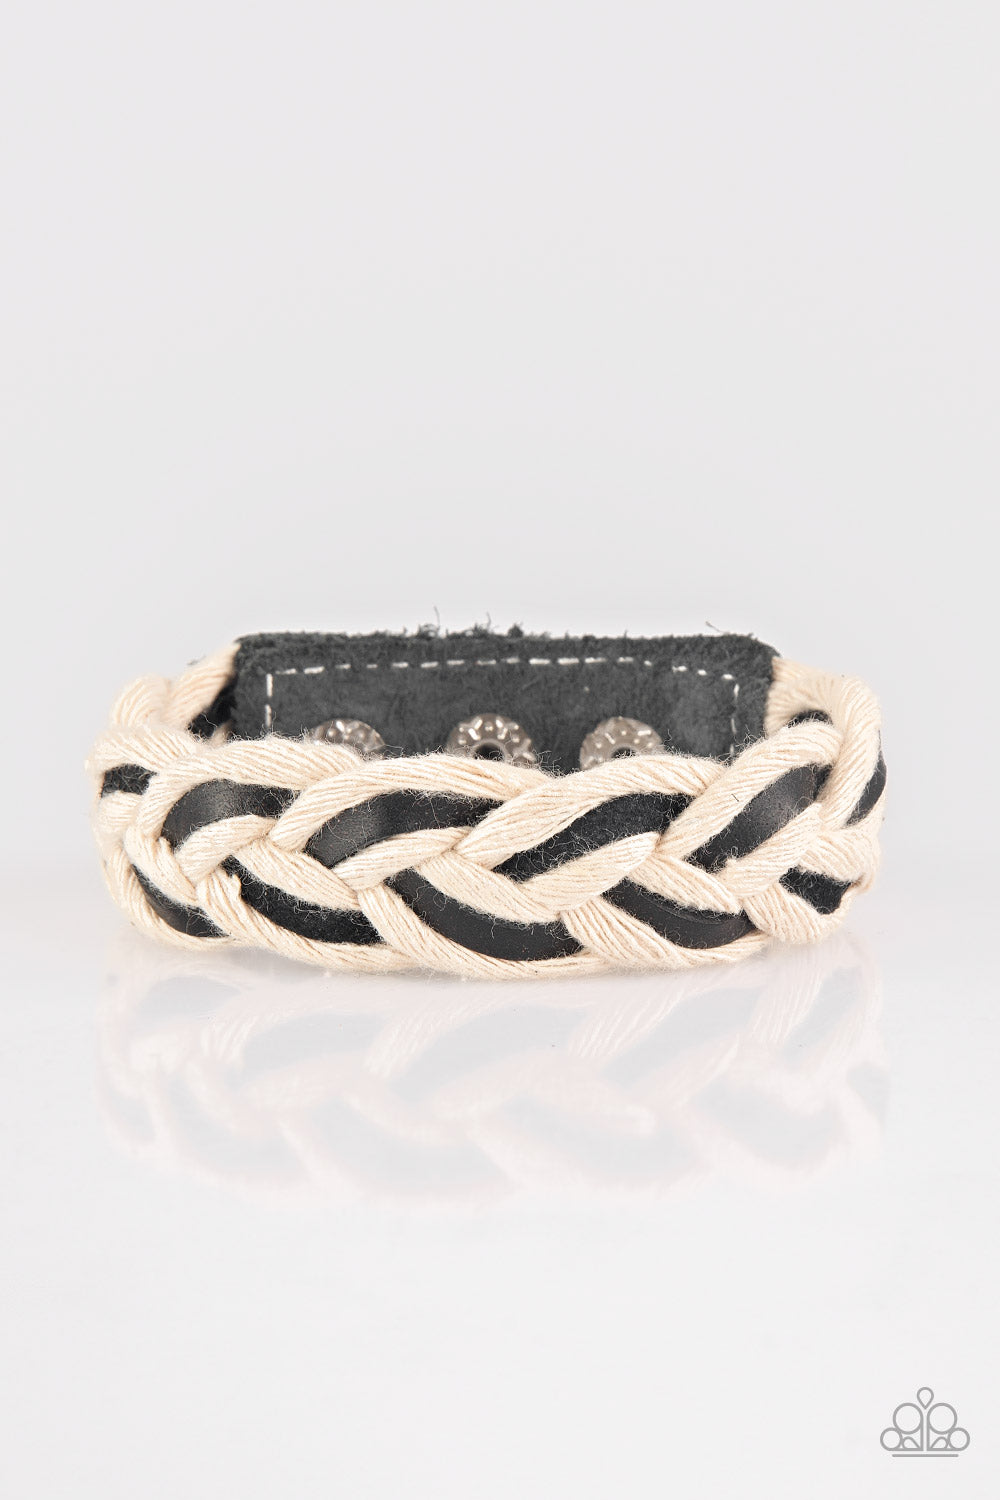 OUTBACK OUTLAW - BLACK LEATHER WHITE TWINE BRAIDED SNAP URBAN MENS UNISEX BRACELET